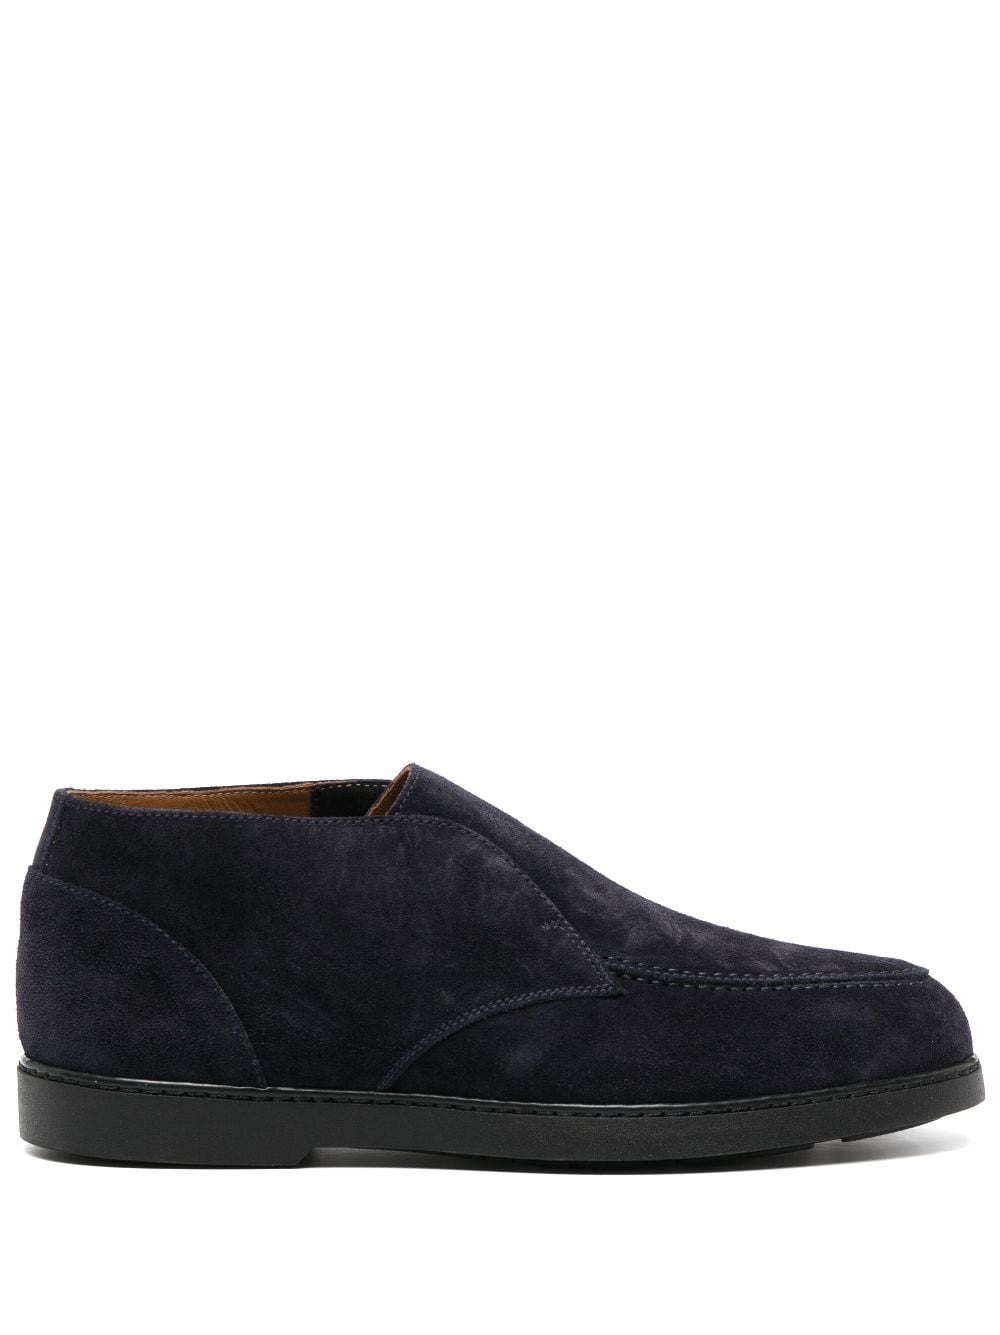 suede chukka ankle boot